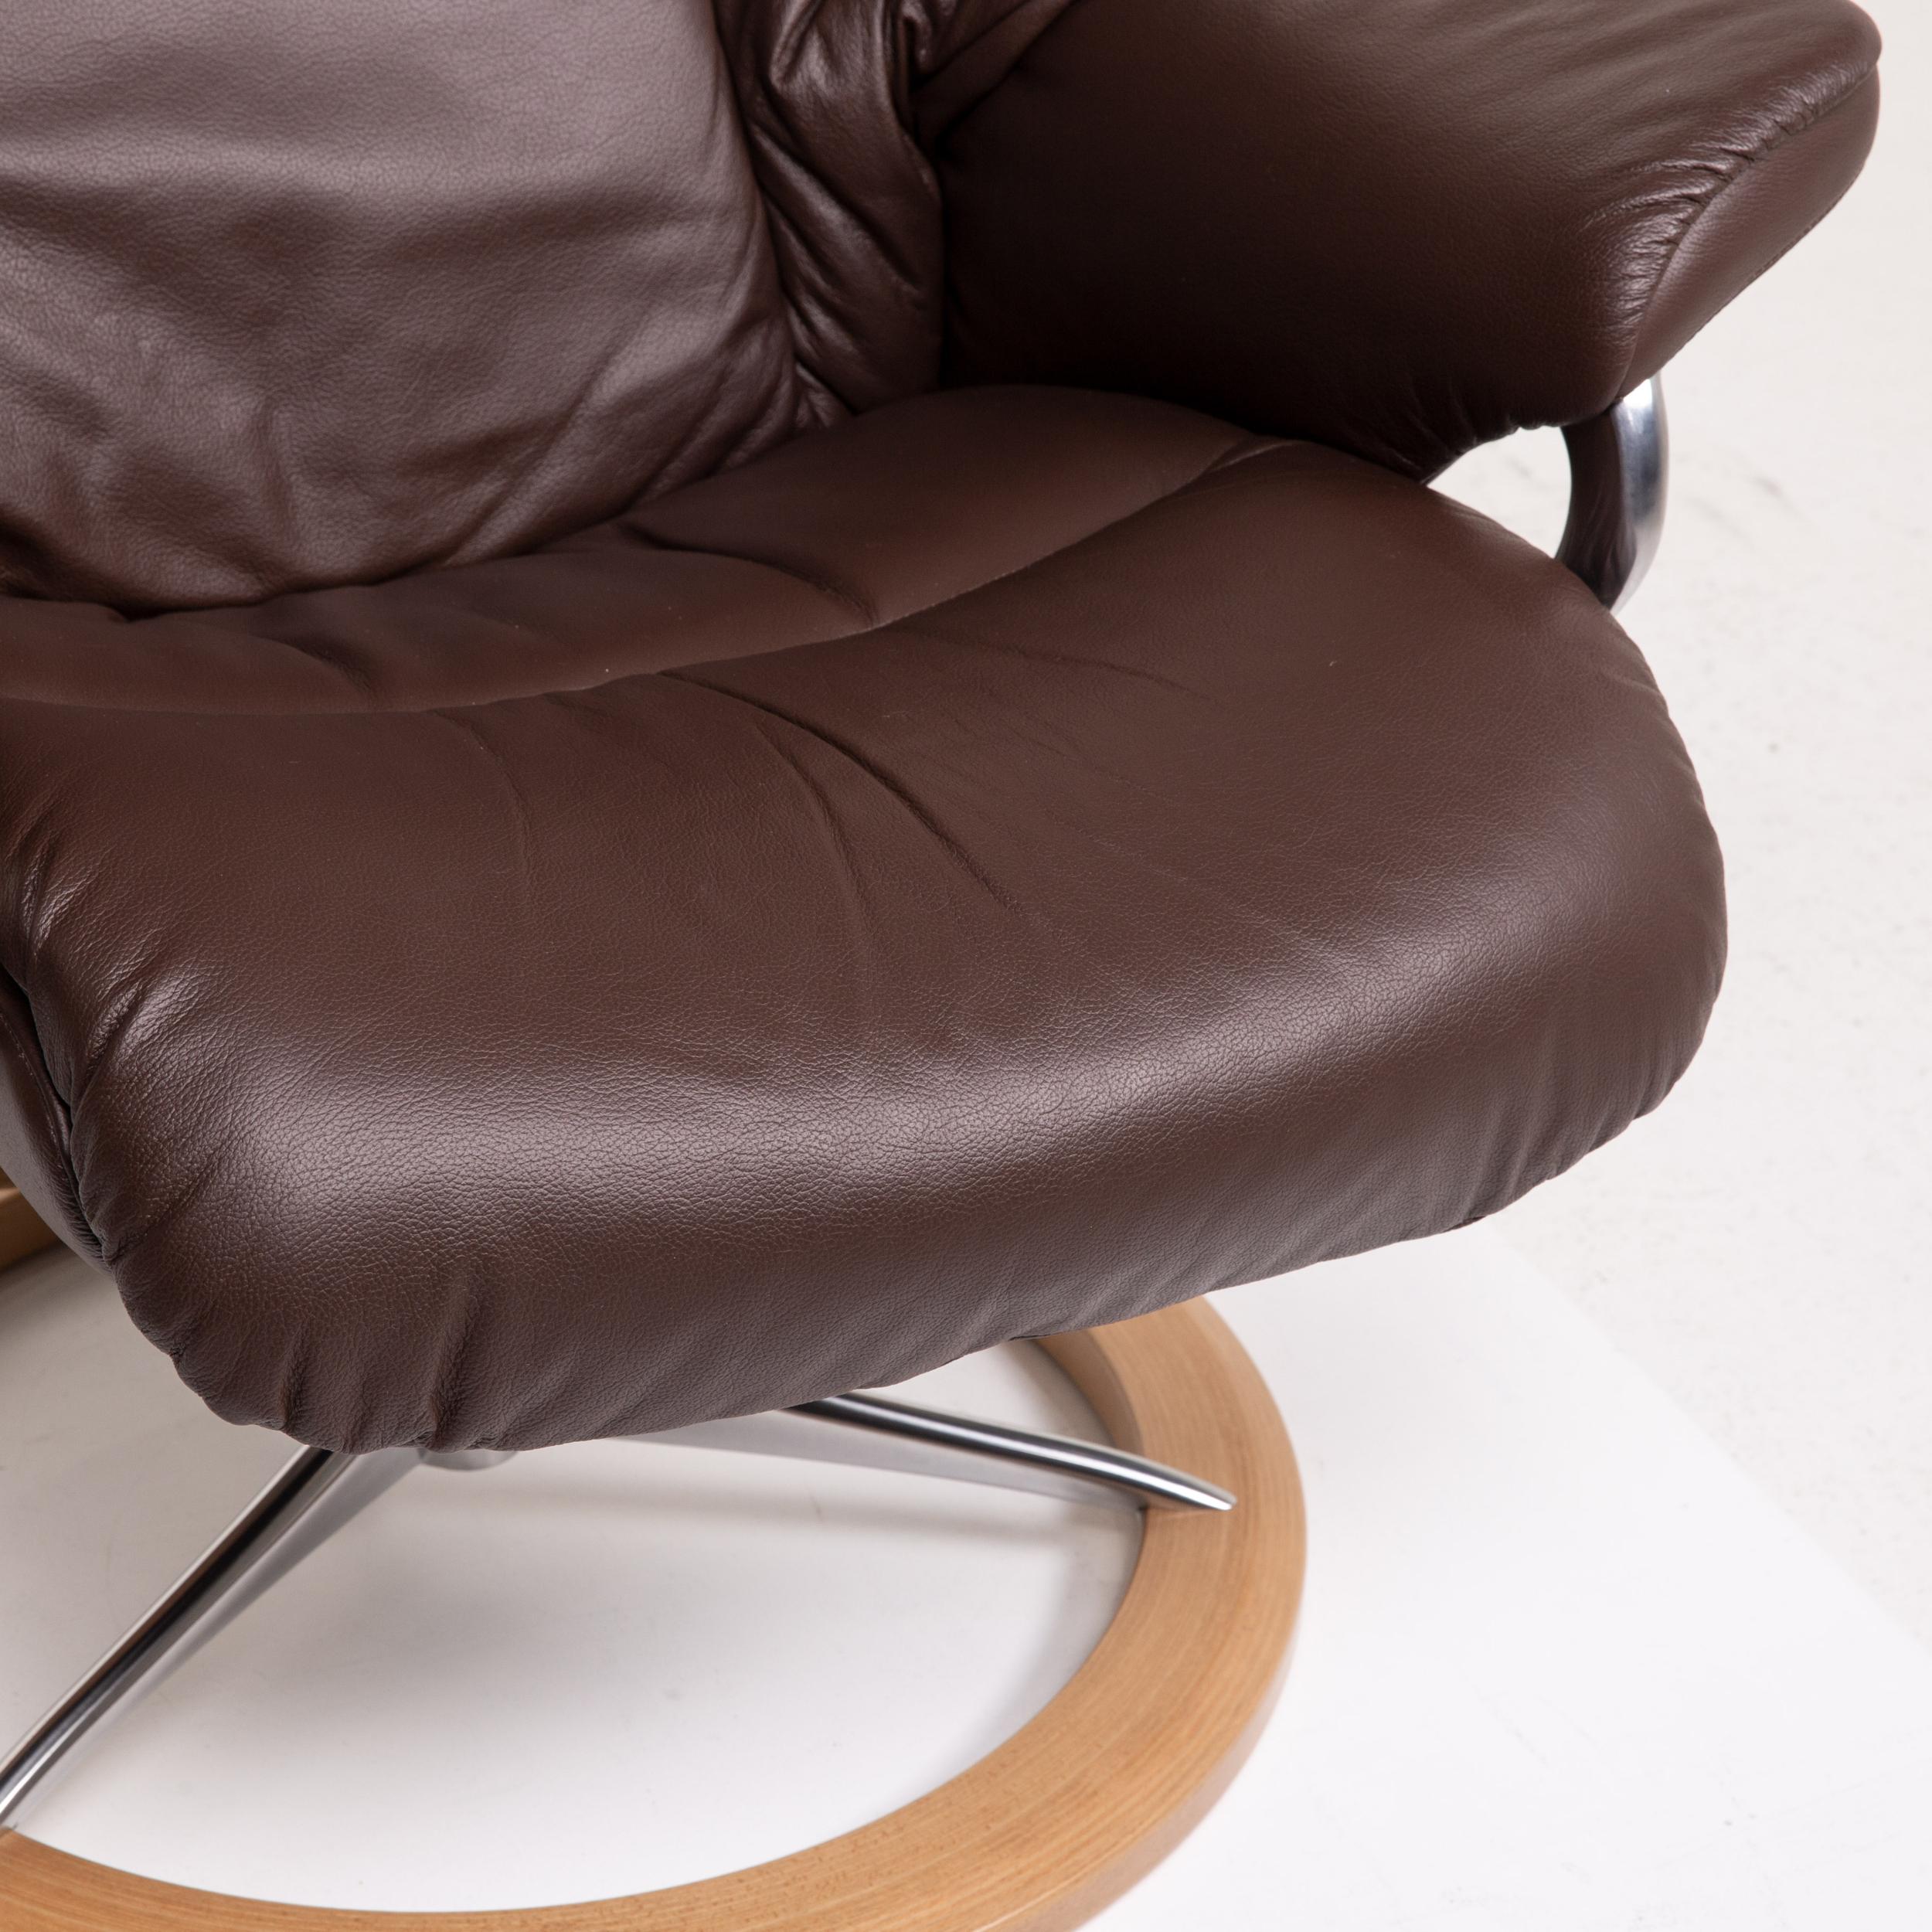 Norwegian Stressless Reno Leather Armchair Incl. Stool Dark Brown Brown Relaxation